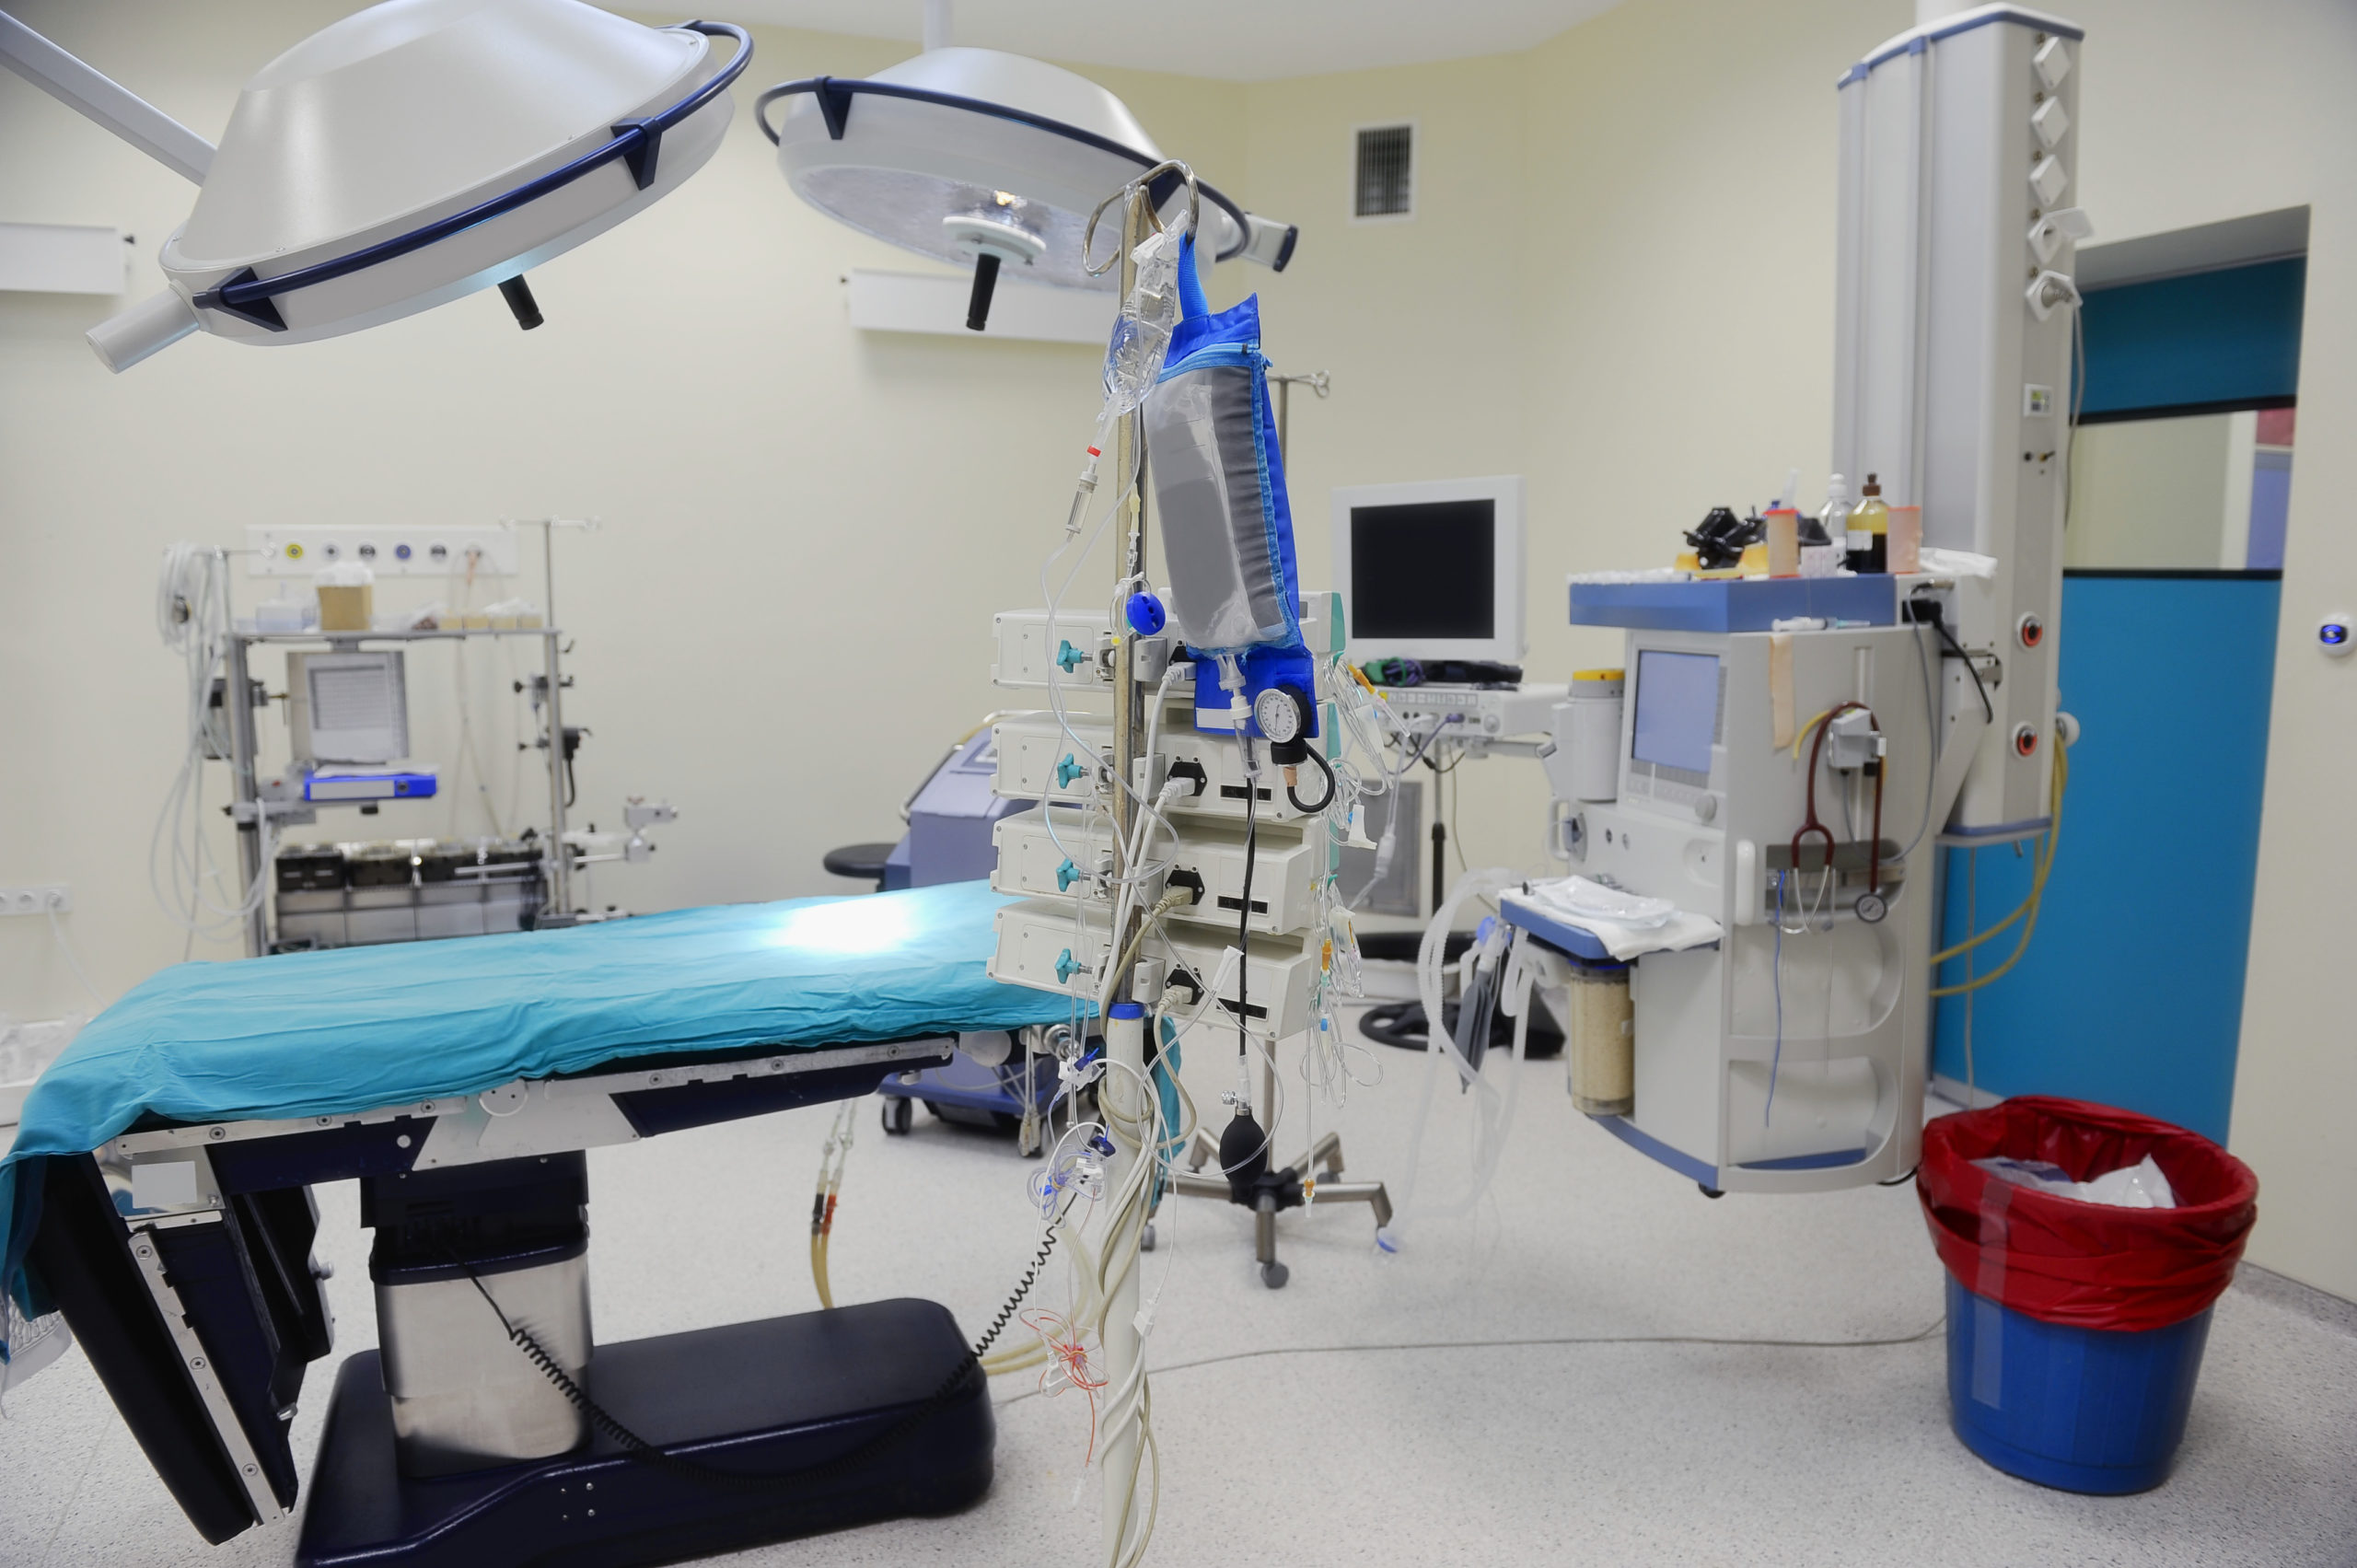 A recently-constructed medical operating room